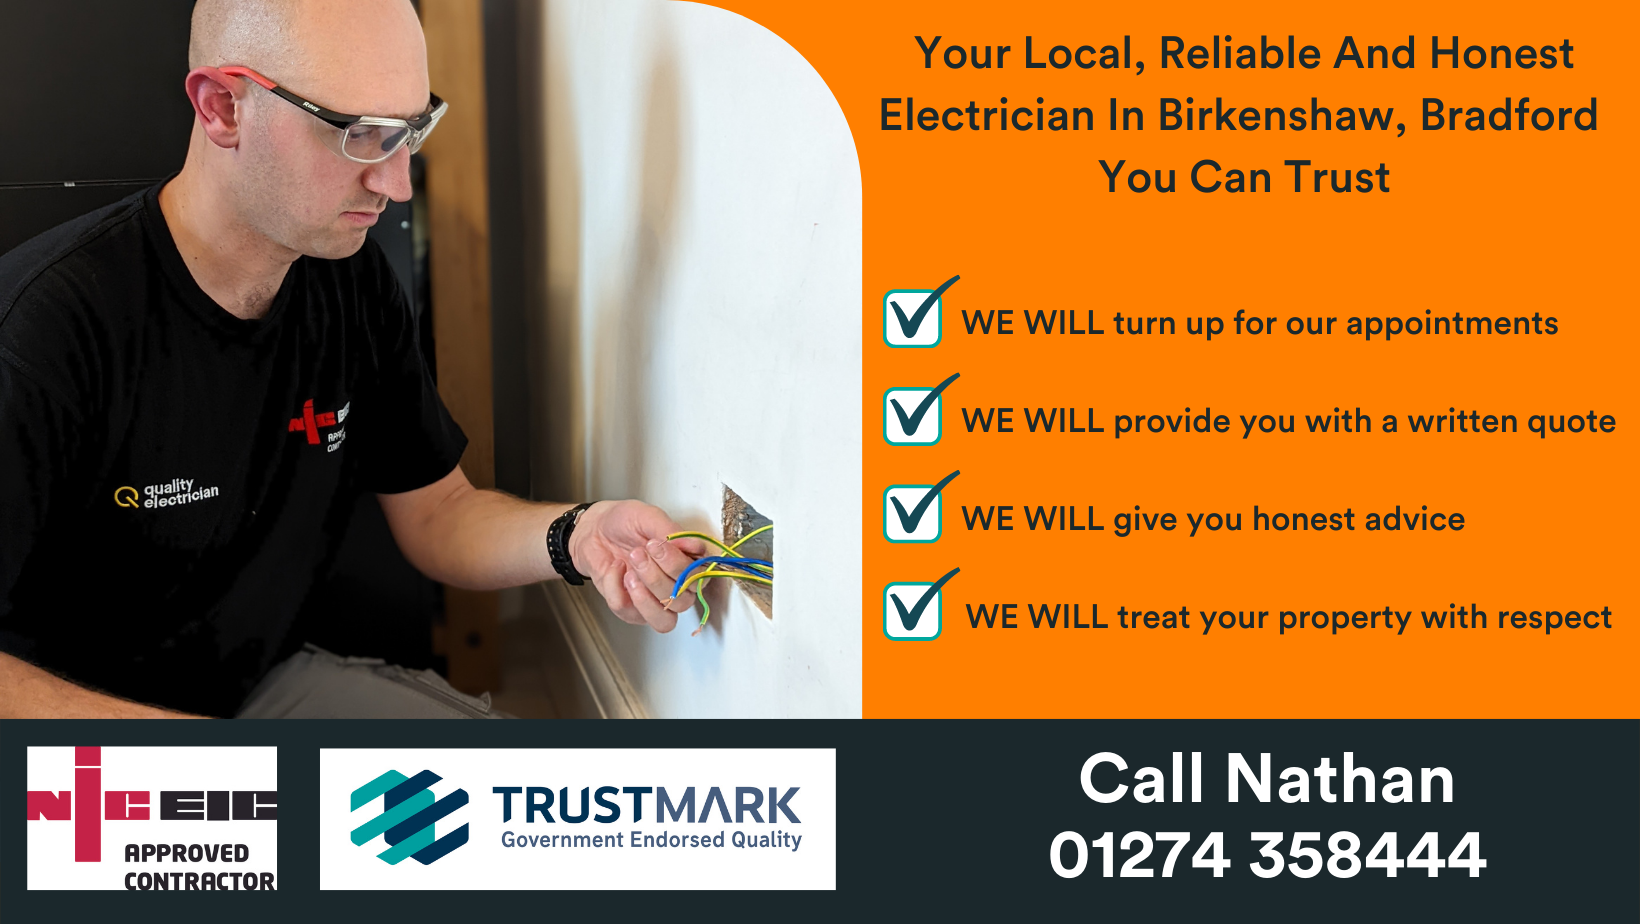 Your local electrician - Reliable, Trustworthy and Honest